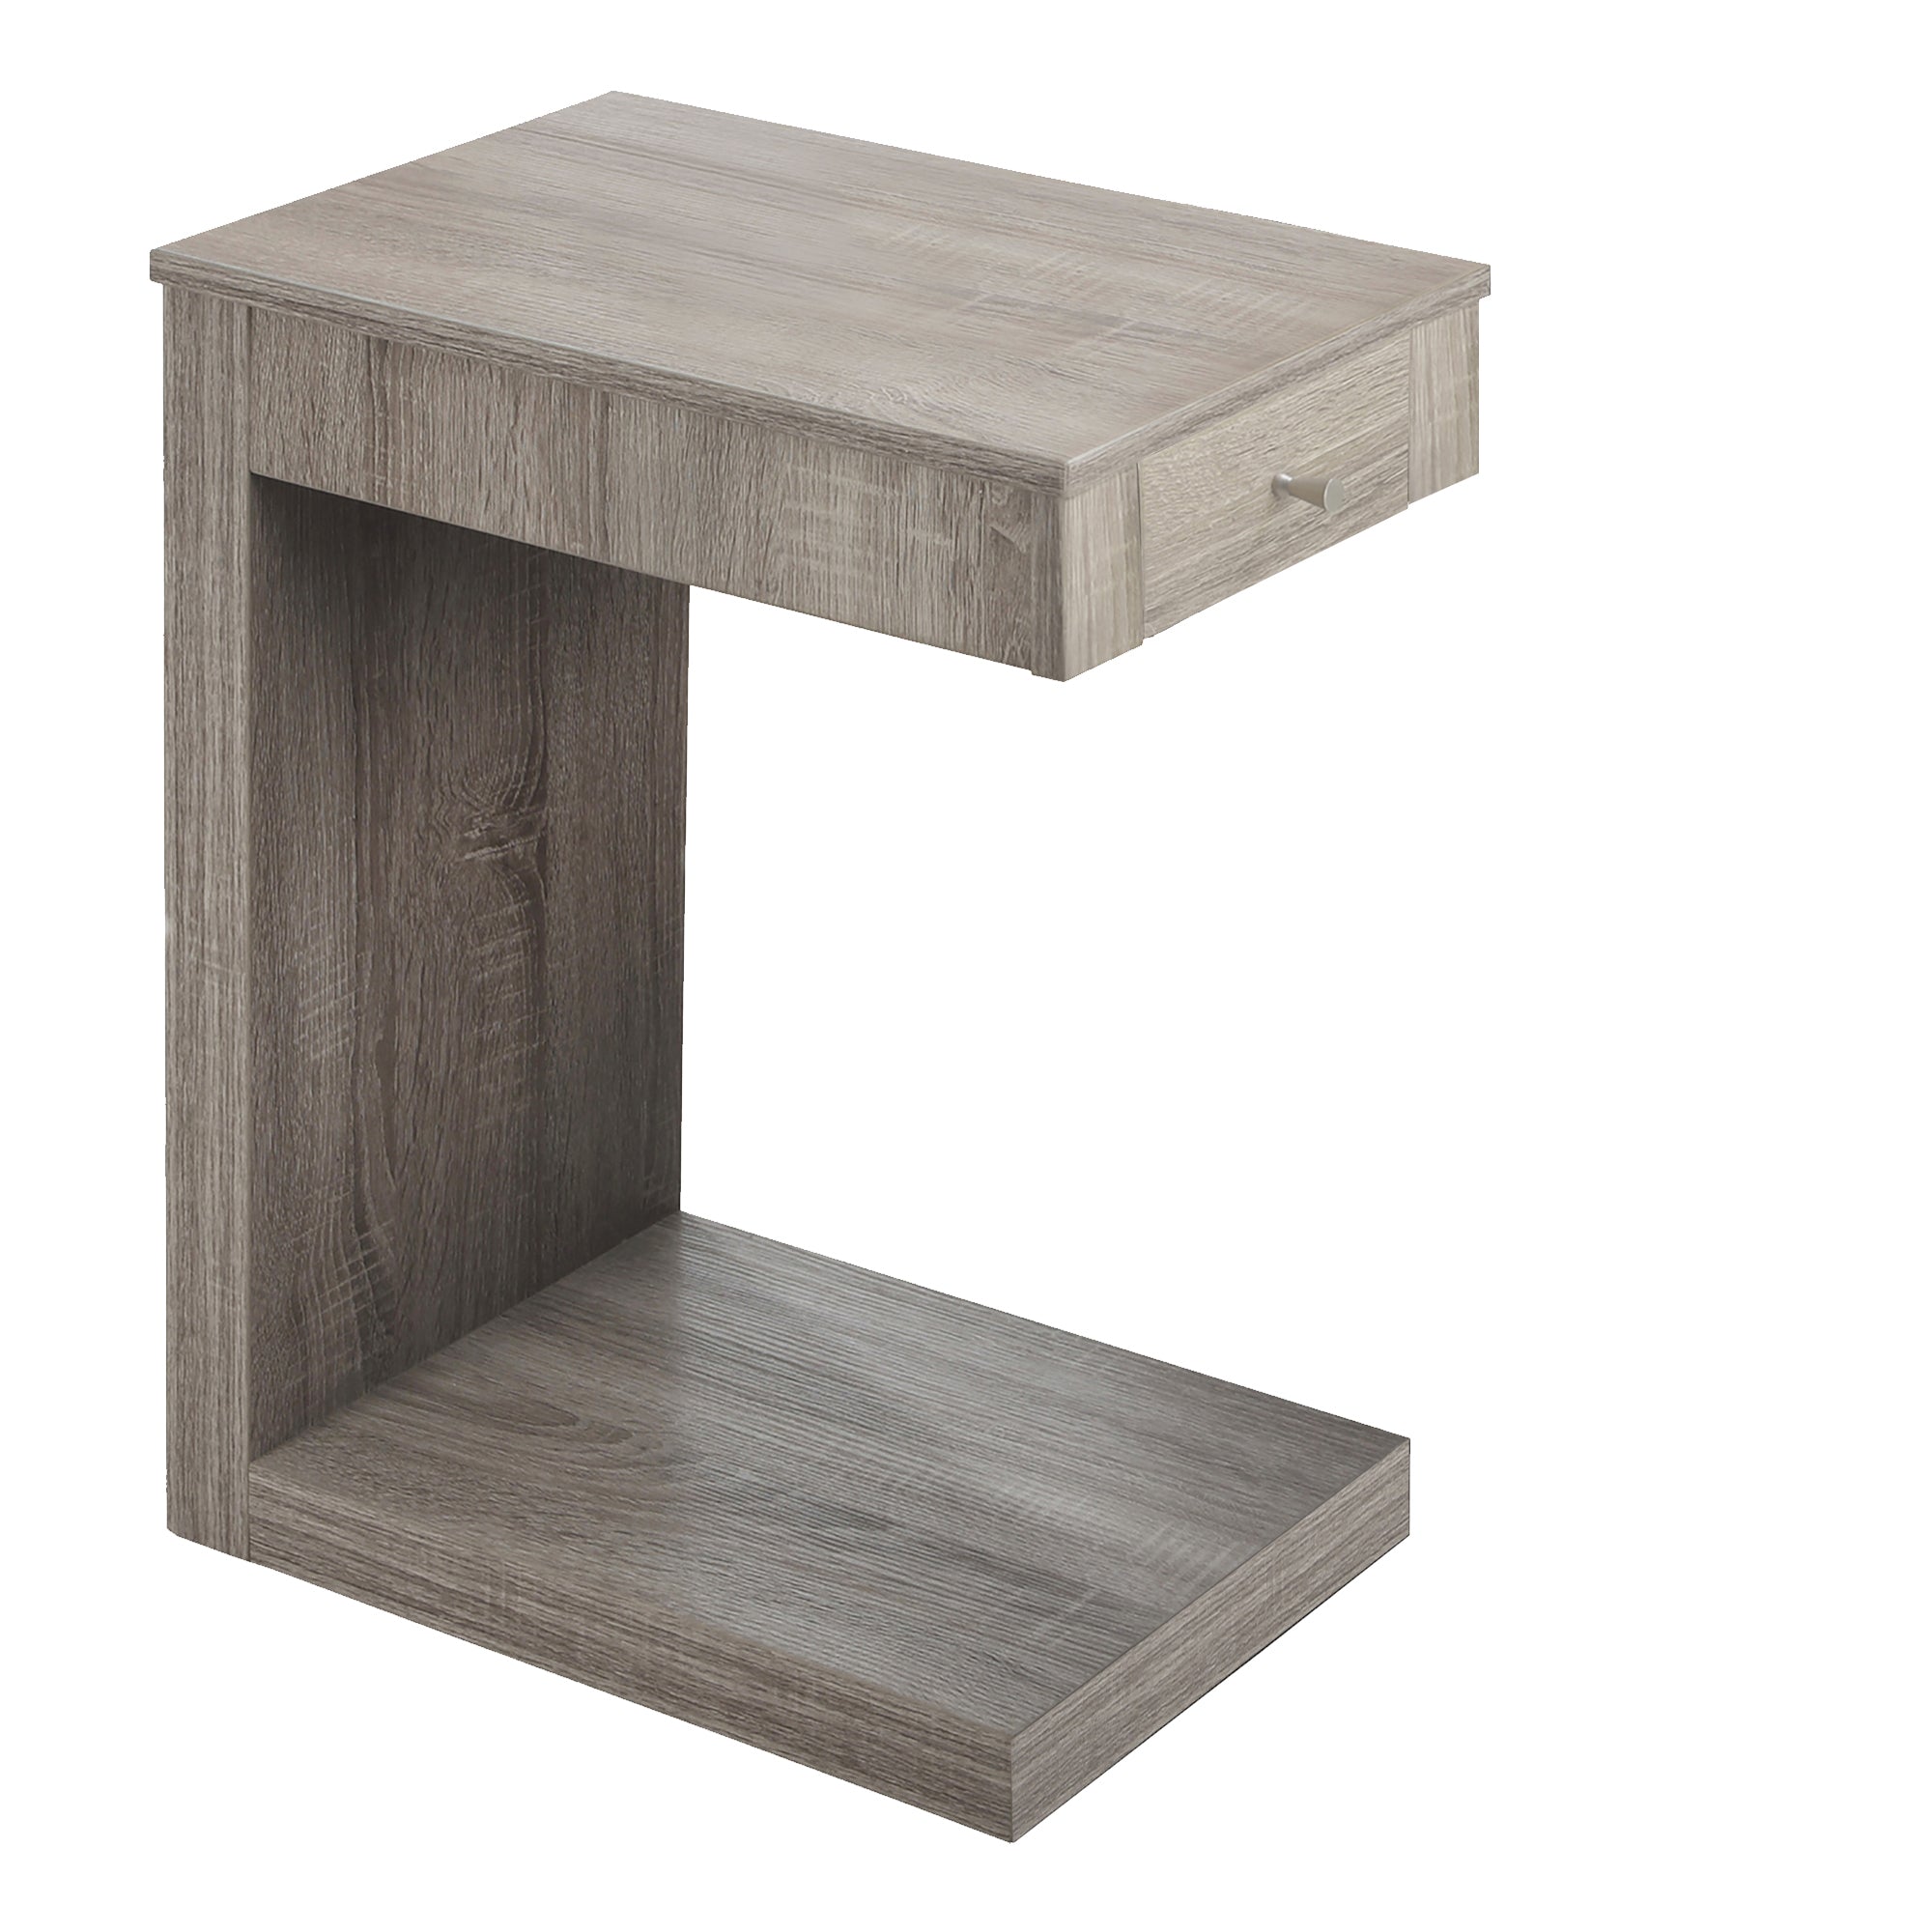 MN-653191    Accent Table, C-Shaped, End, Side, Snack, Living Room, Bedroom, Storage Drawer, Laminate, Dark Taupe, Contemporary, Modern